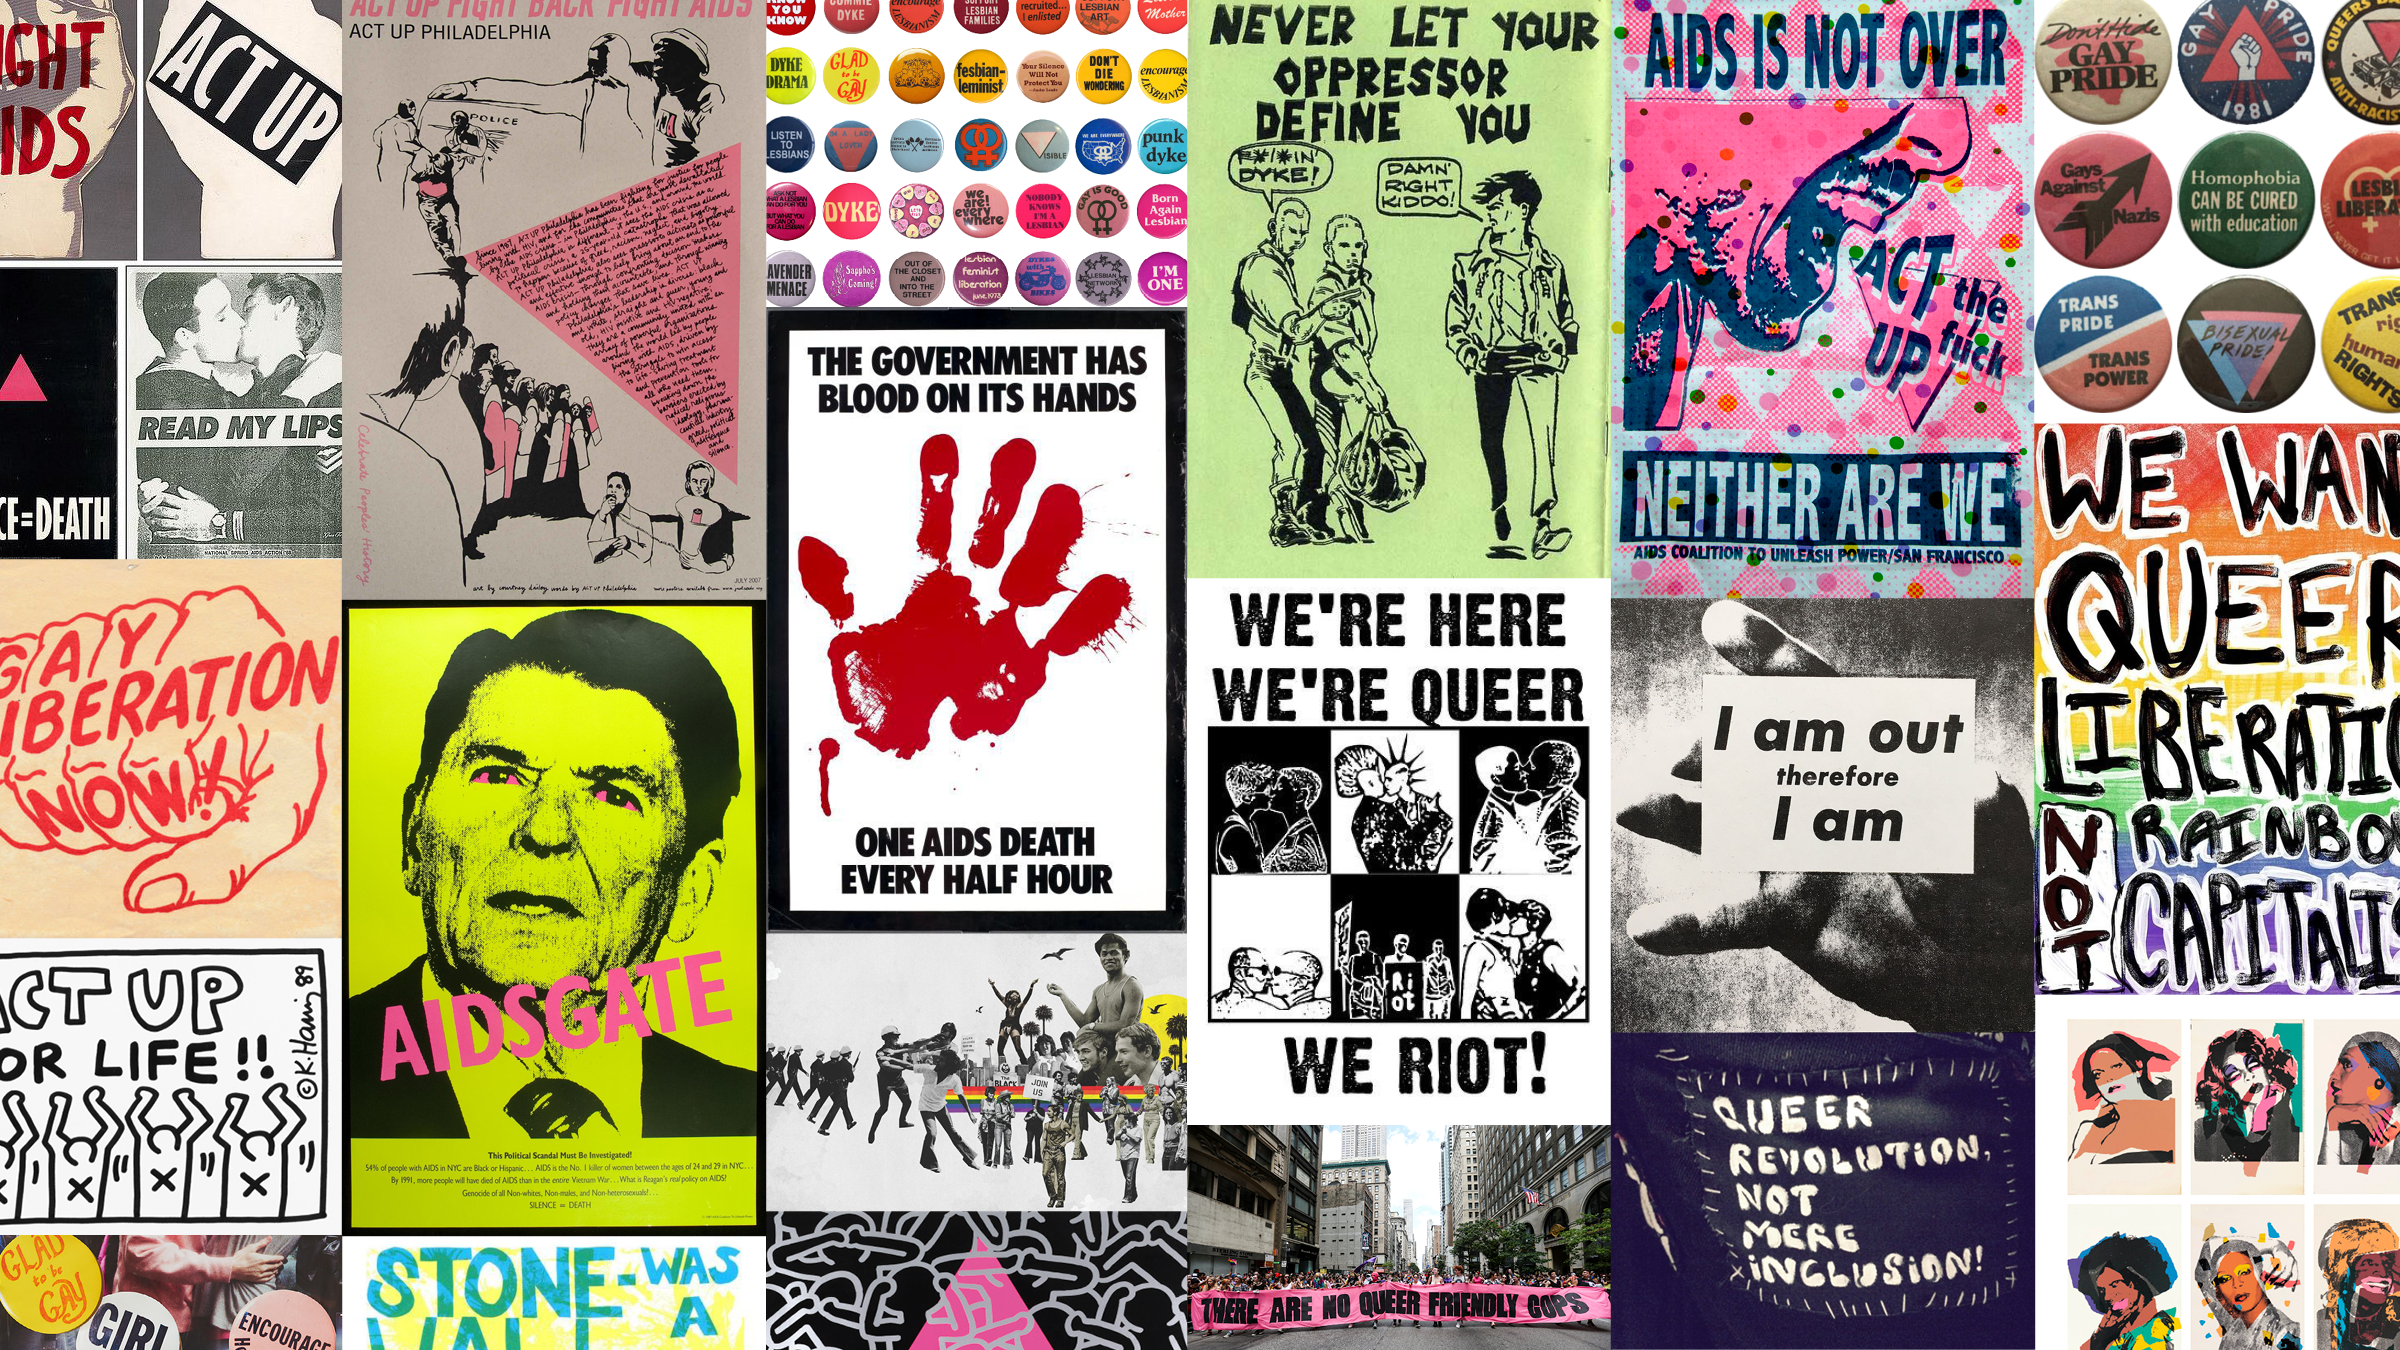 a collage of various prints, paintings, drawings, flyers, photographs, and buttons from queer history. Many of the flyers are from the AIDS crisis, with works of gran fury's ACT UP, andy warhol, keith haring, and others, while other pieces are more modern, discussing issues like rainbow capitalism.